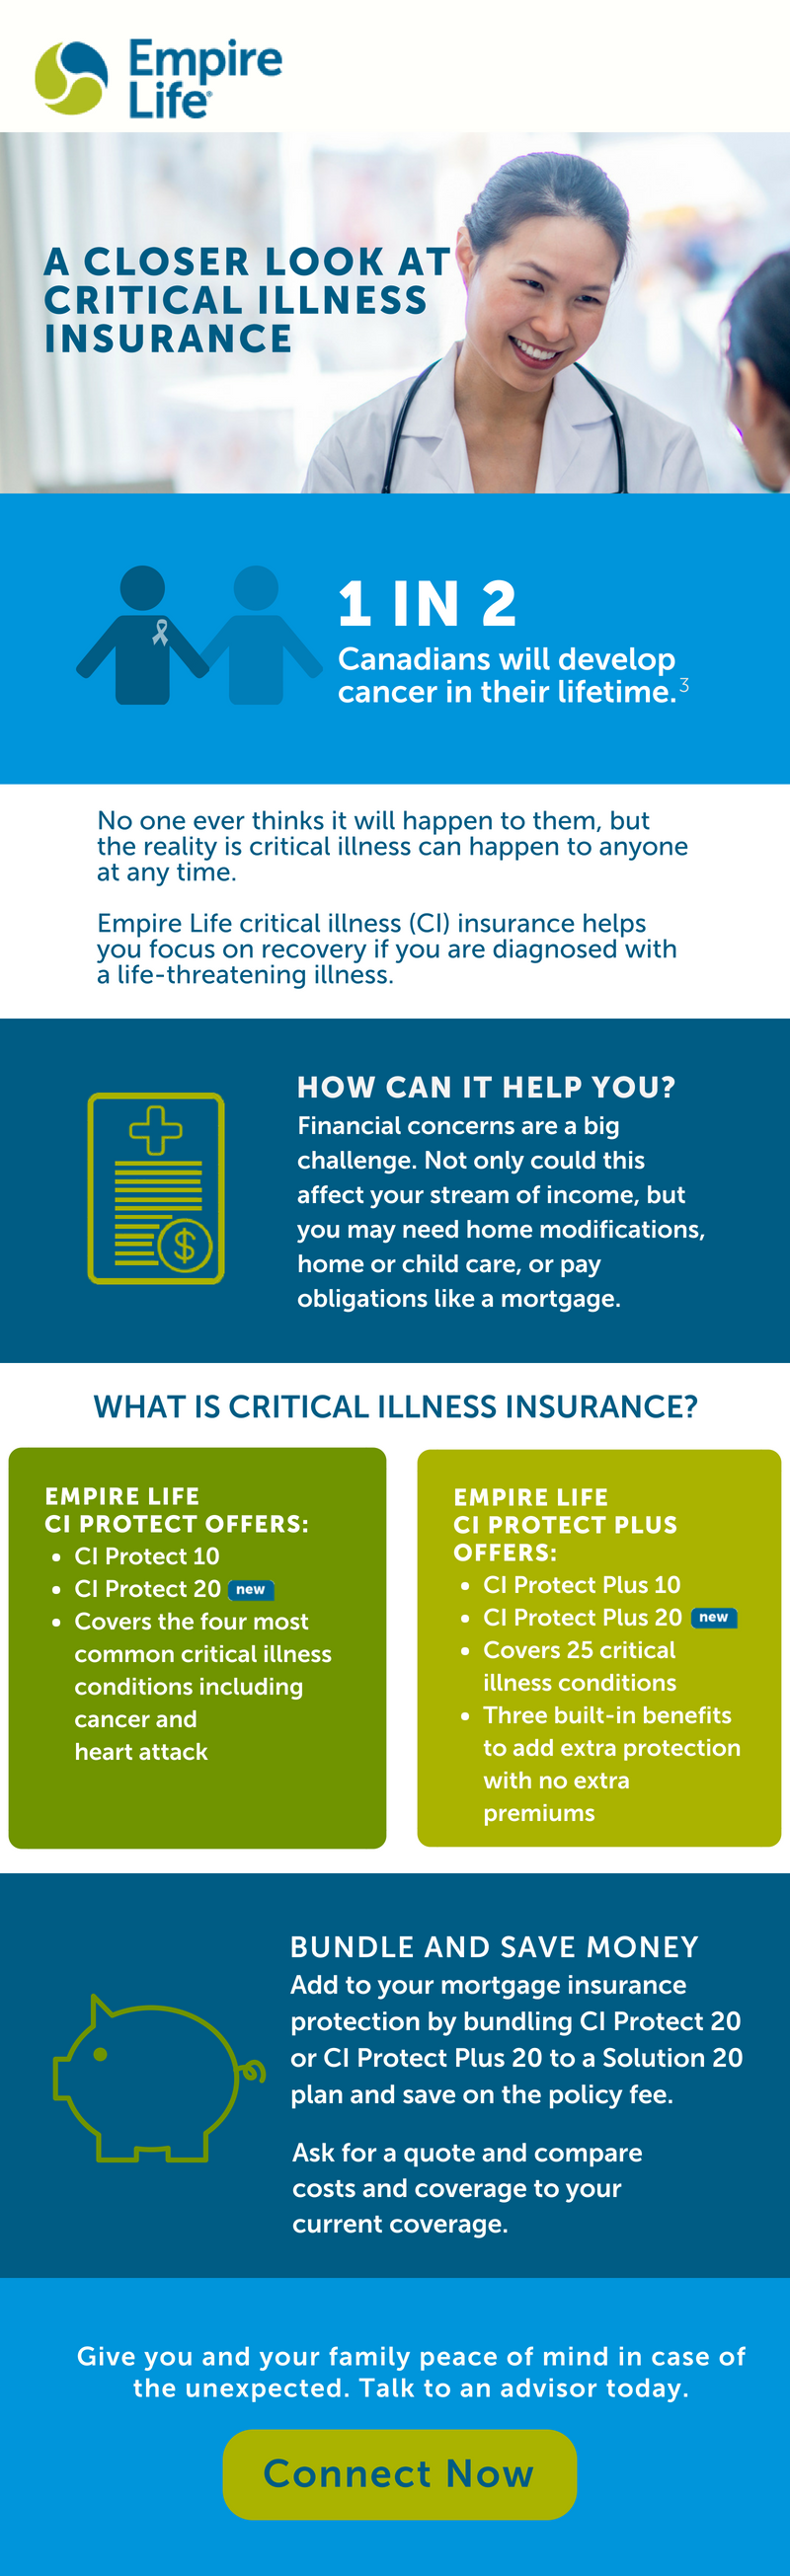 Different Types of Life Insurance, Comparison, Empire Life